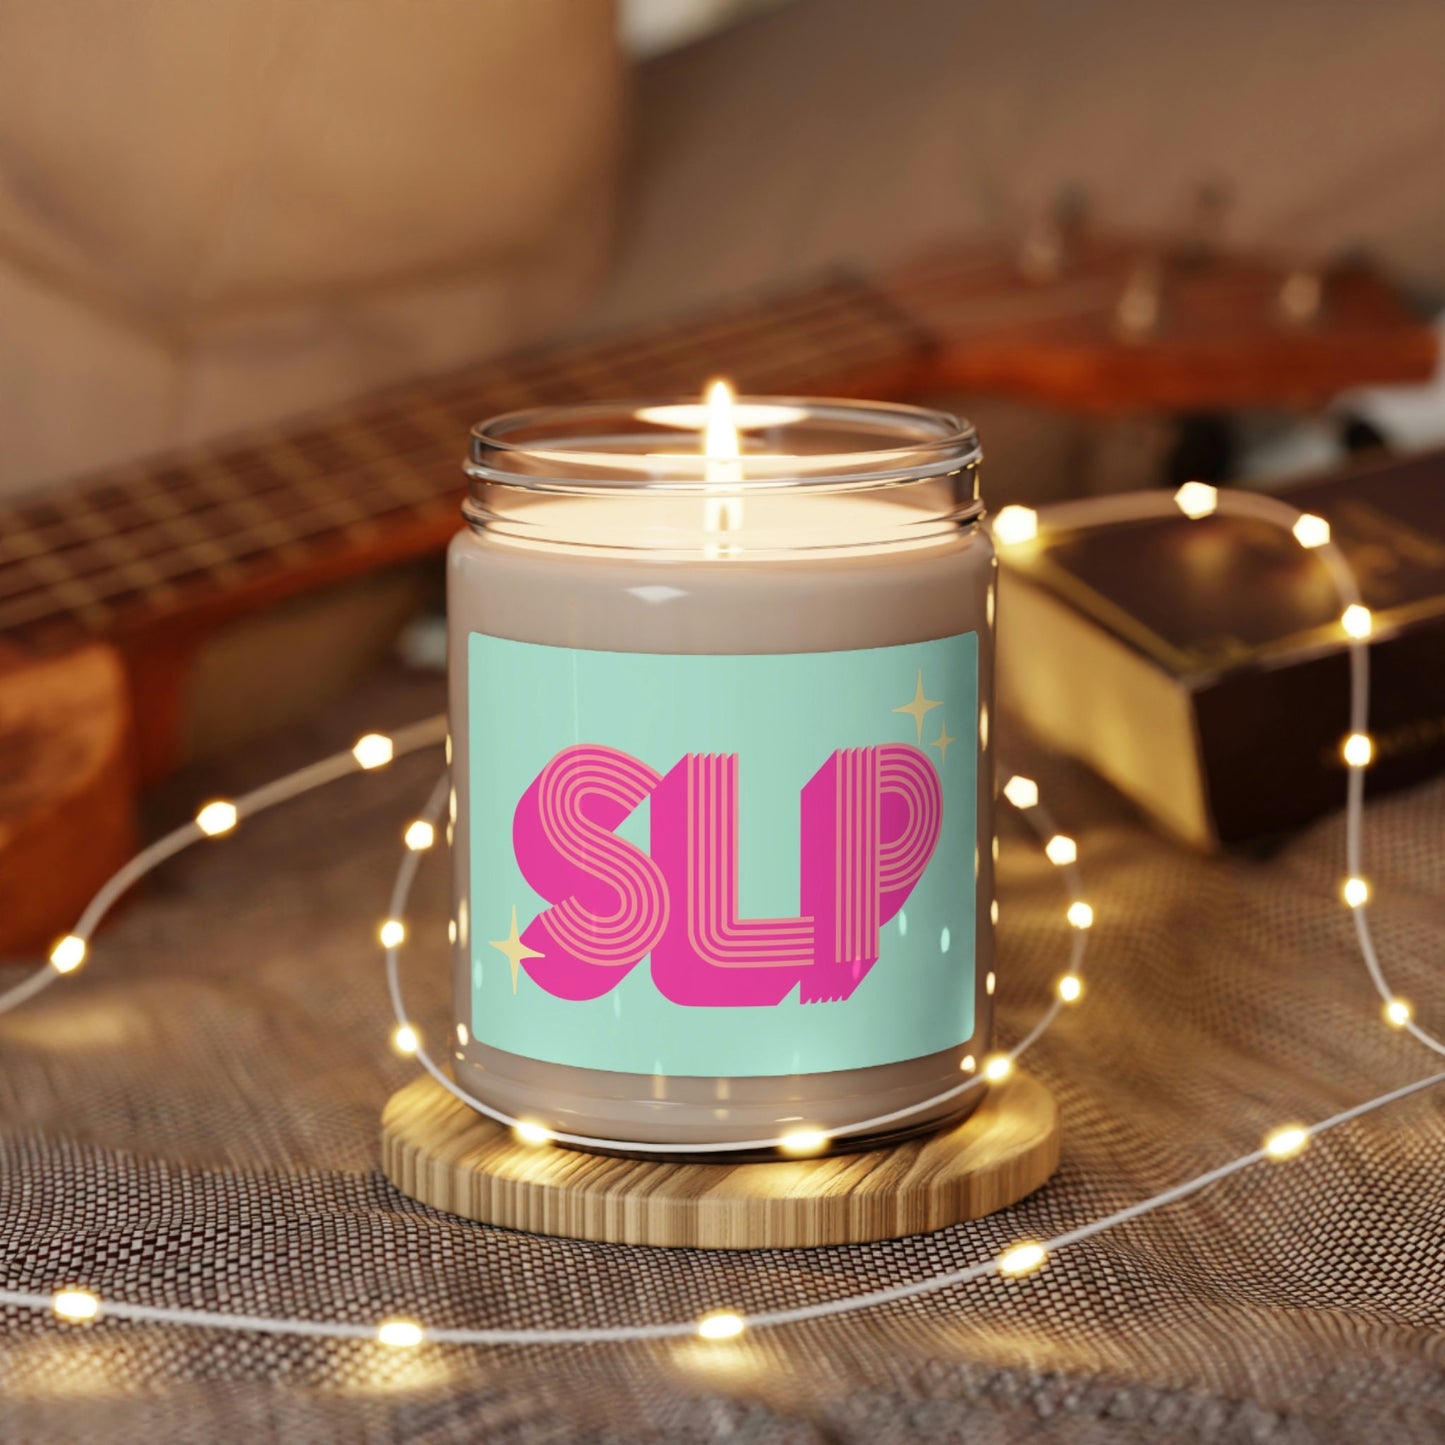 SLP Retro Mint Pink Scented Candle, 9 oz.